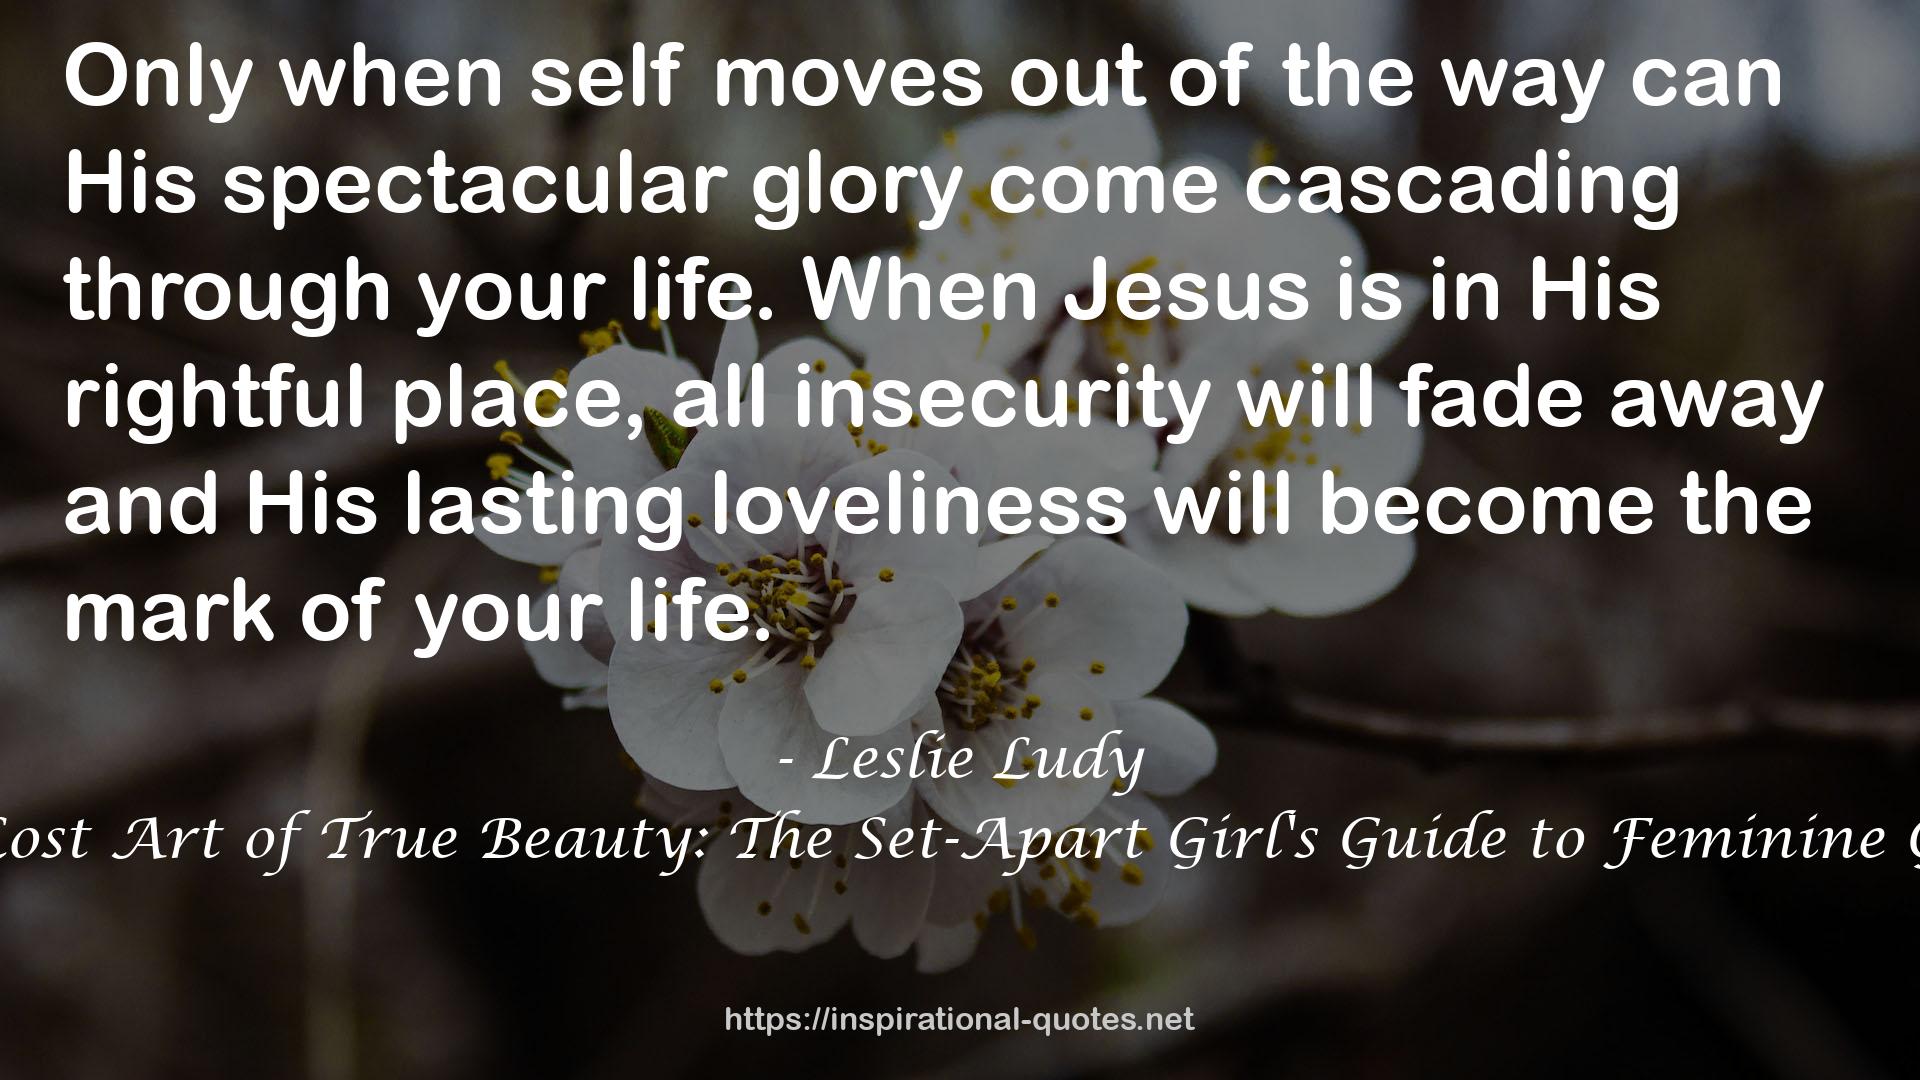 The Lost Art of True Beauty: The Set-Apart Girl's Guide to Feminine Grace QUOTES